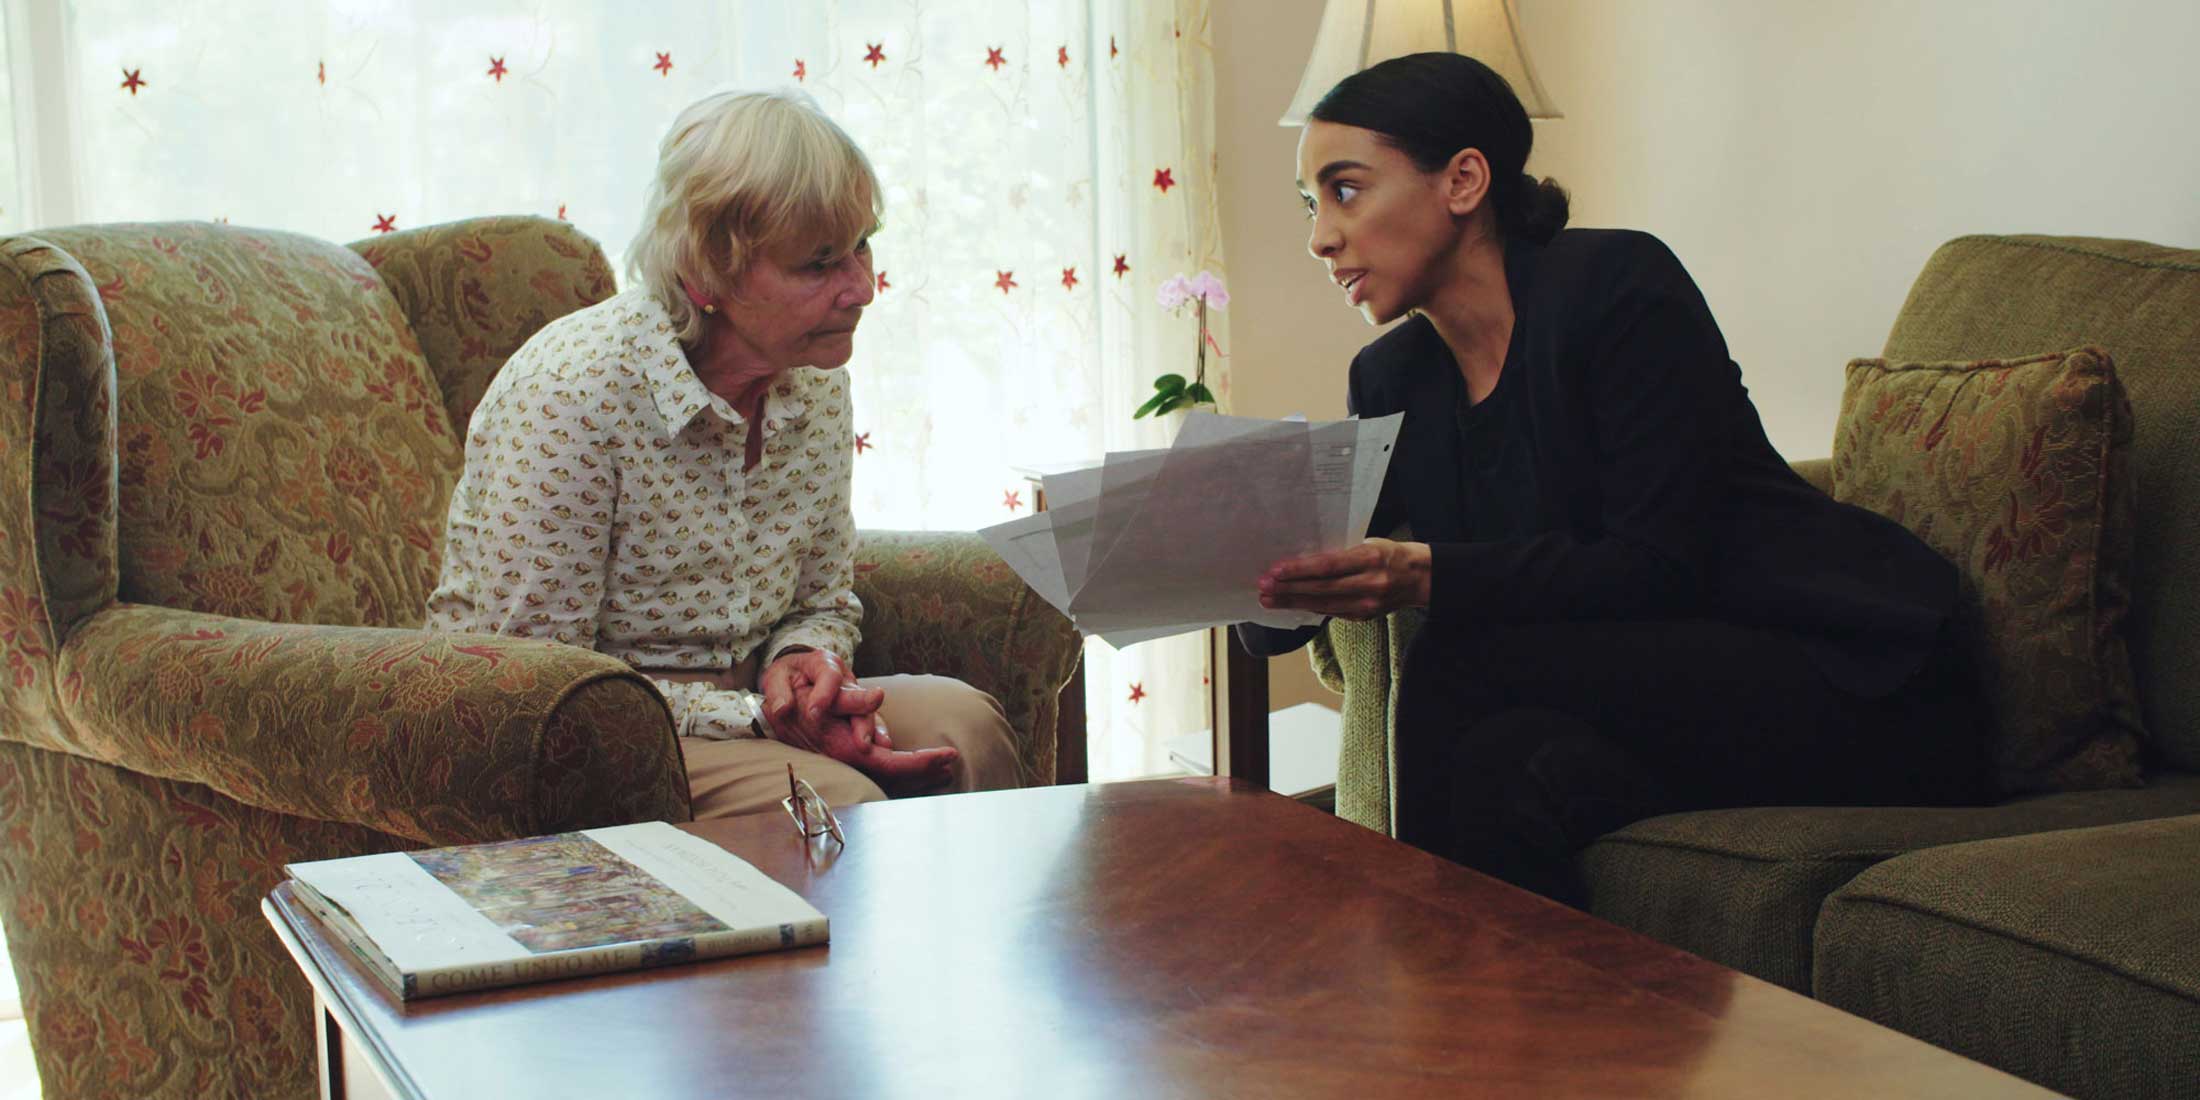 Young woman showing papers to older woman in a living room setting